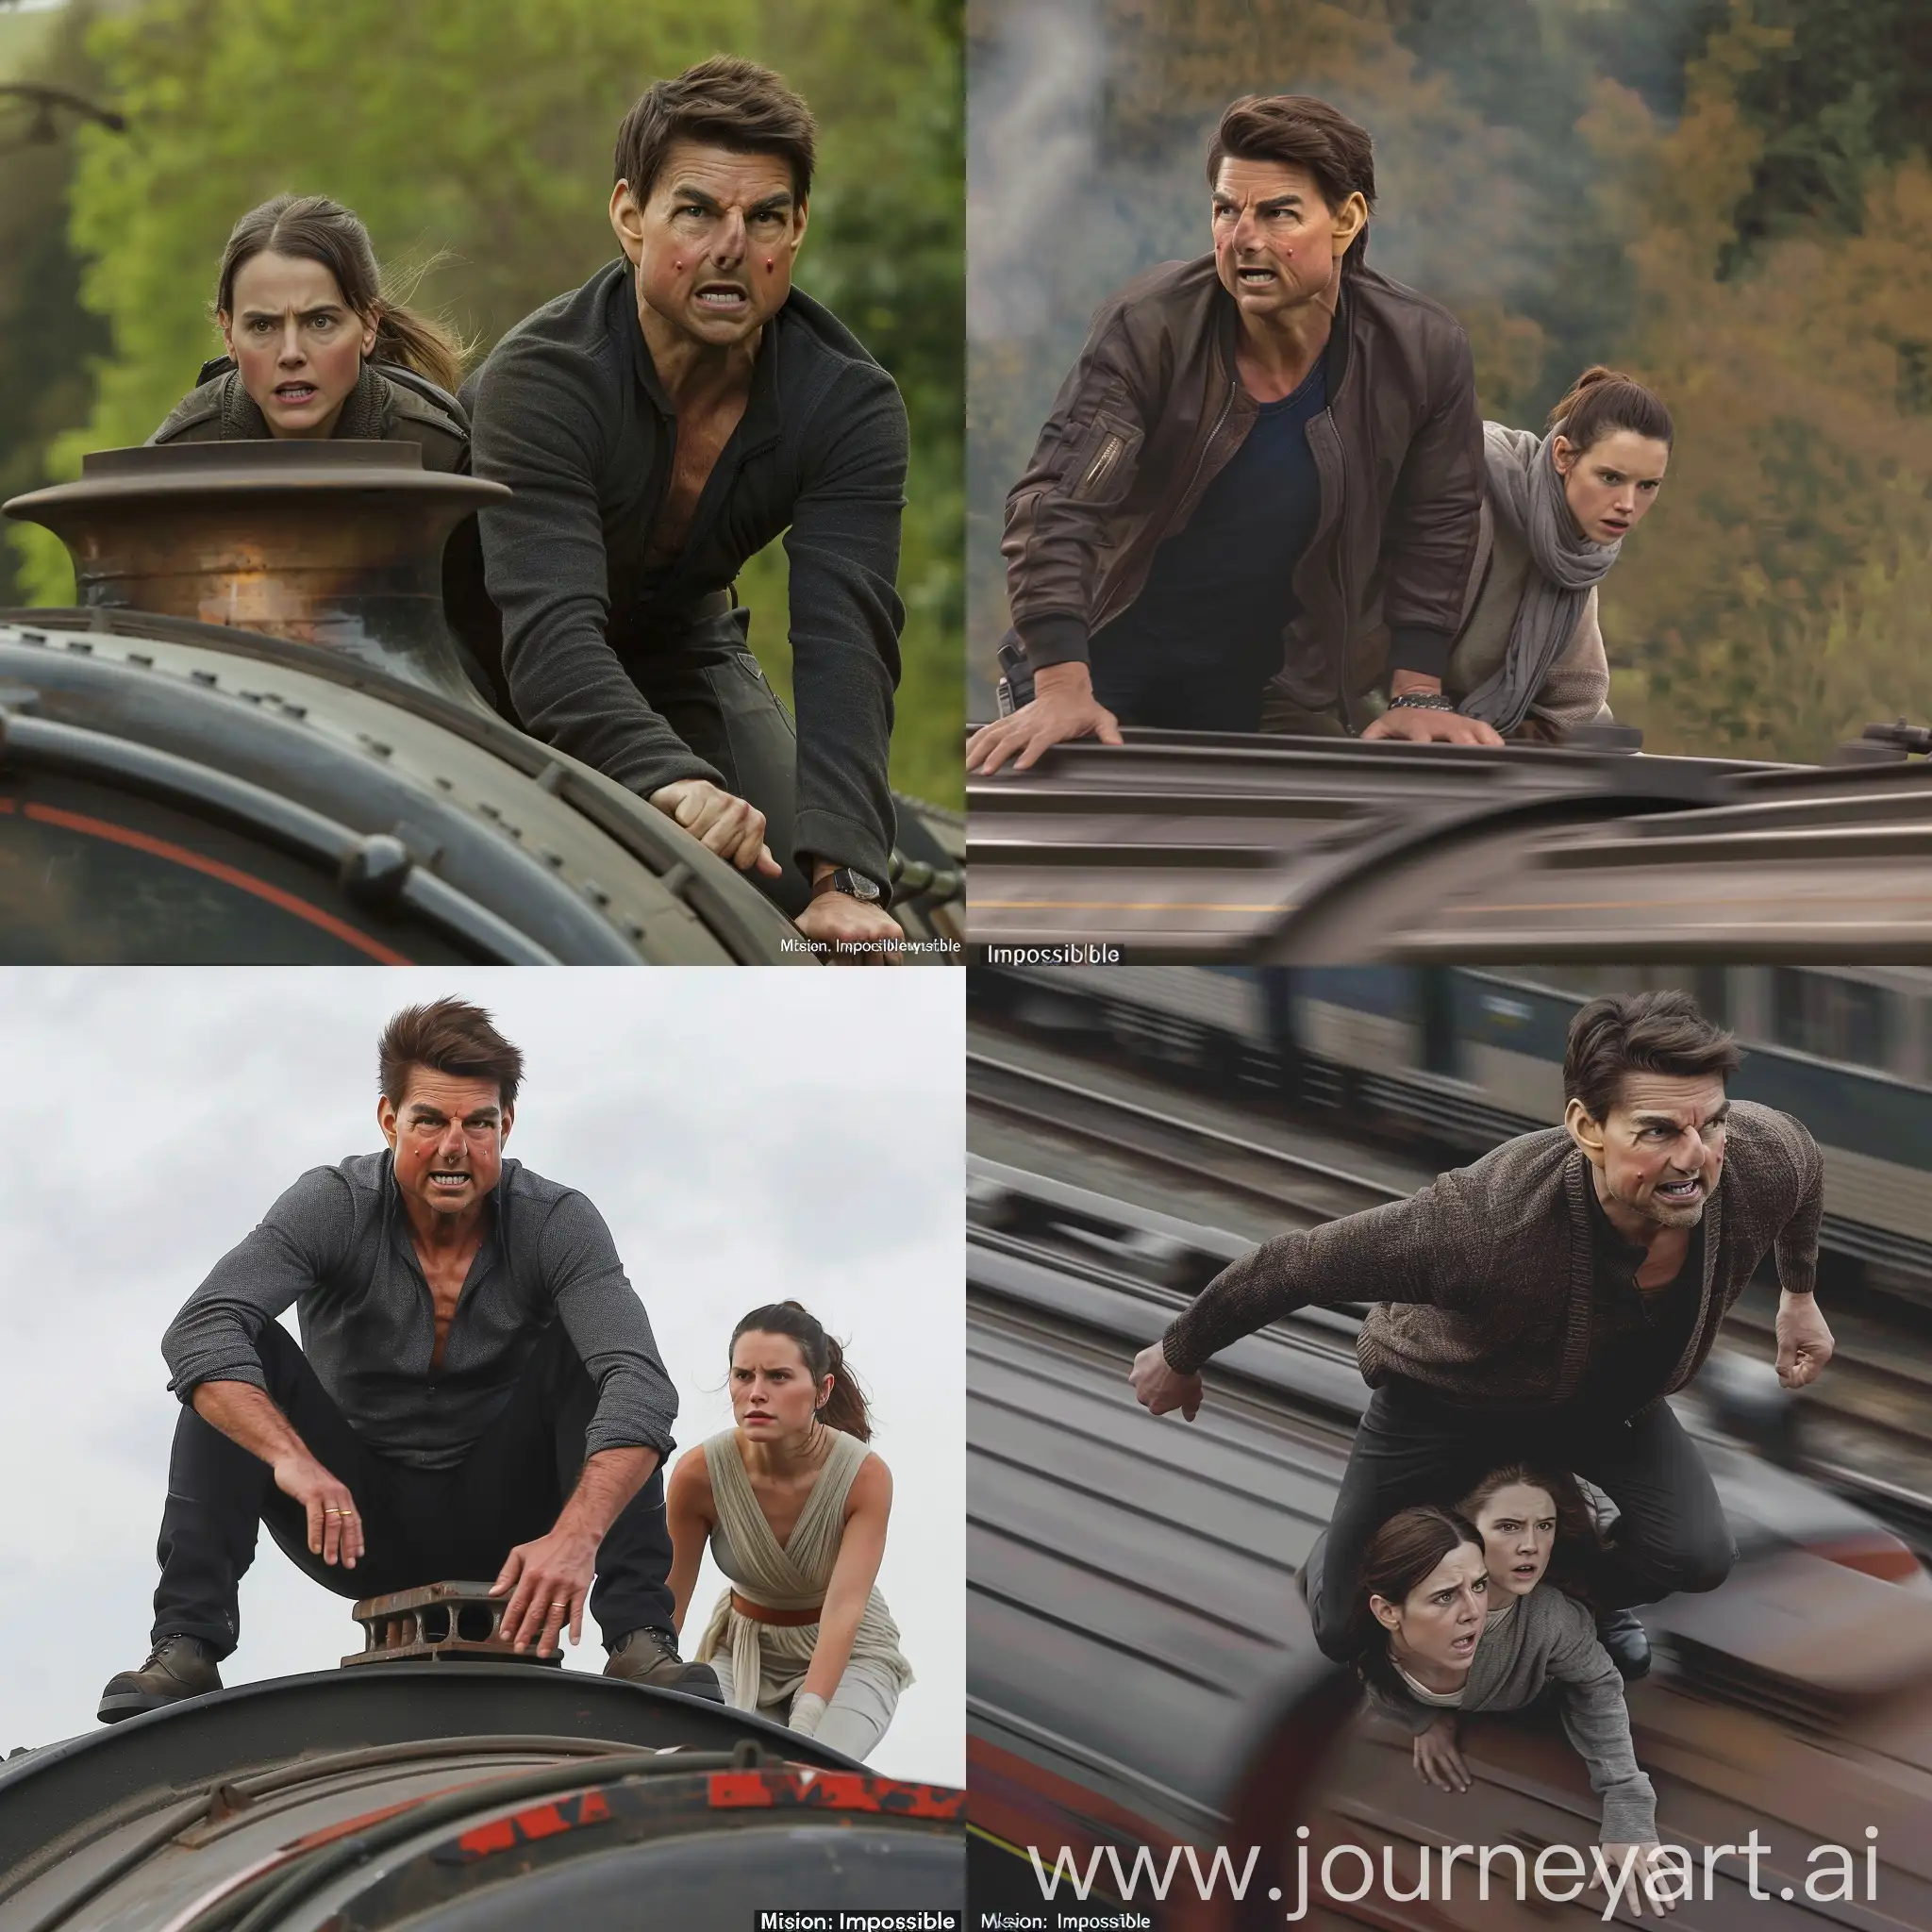 In the image, we see actor Tom Cruise known for his role as Ethan Hunt in the film “Mission: Impossible”. He is on top of a speeding train, looking worried with Daisy Ridley at his side8k